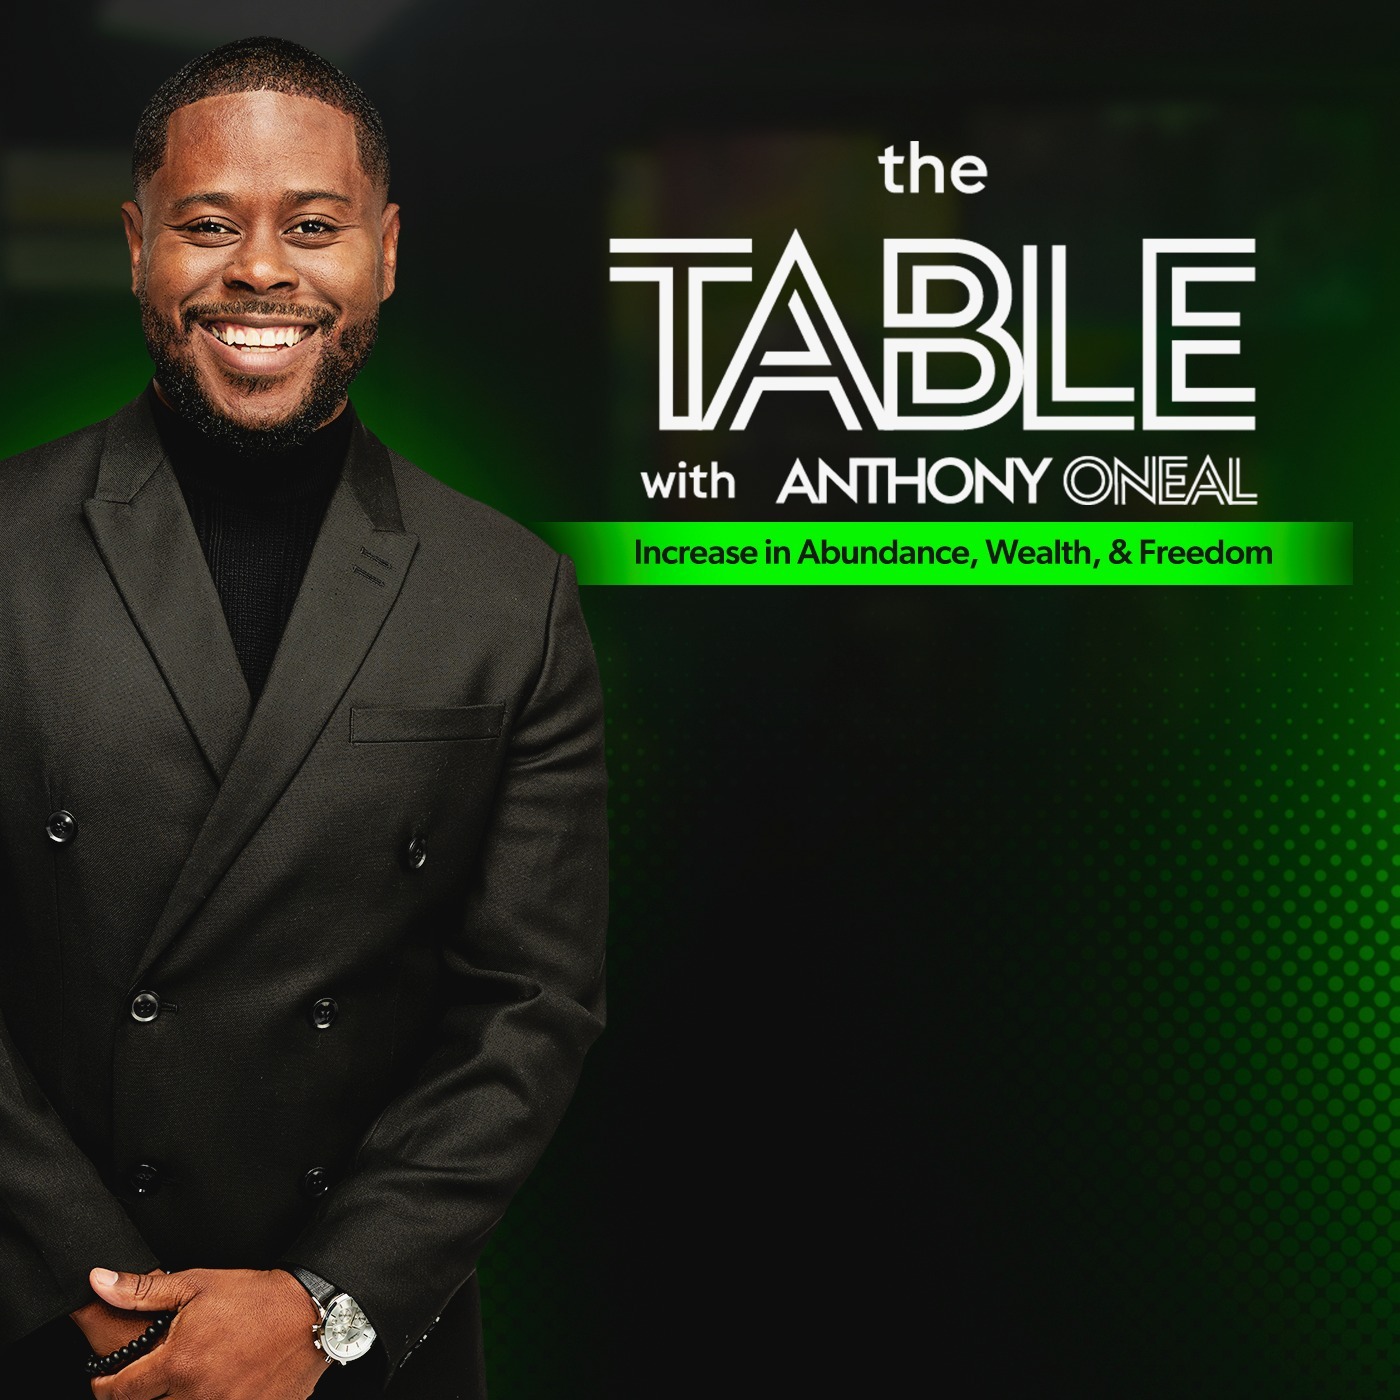 He's 19, Single, Debt Free, Making $70k a Year: Here's How He Did It | Anthony ONeal